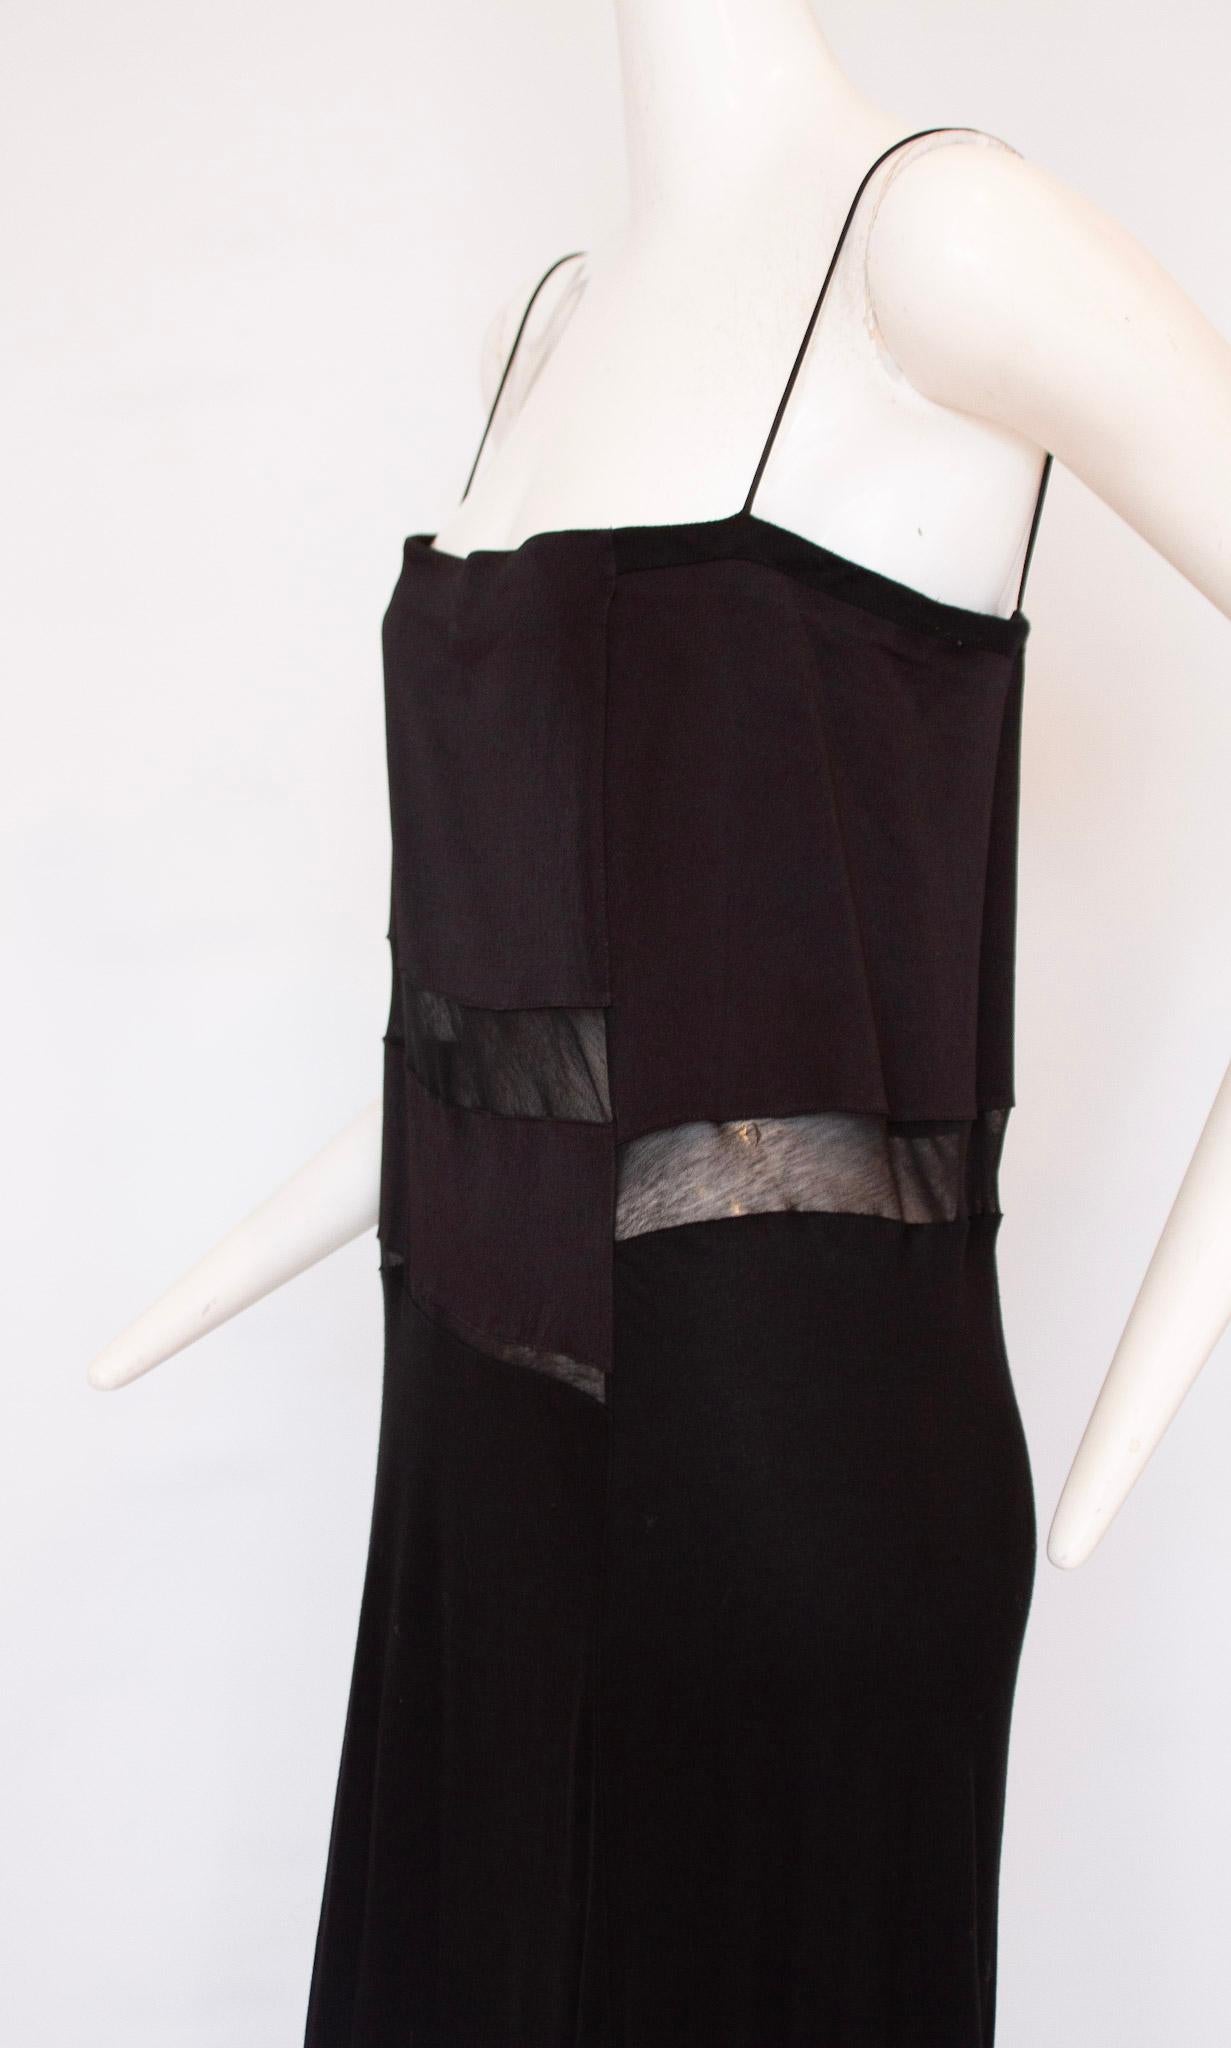 The Helmut Lang Black Maxi Dress features silk, sheer panels at the midriff and bottom, adding a subtle touch of sophistication. With a timeless all-black aesthetic, this dress has a look that will never go out of style. Its flattering silhouette